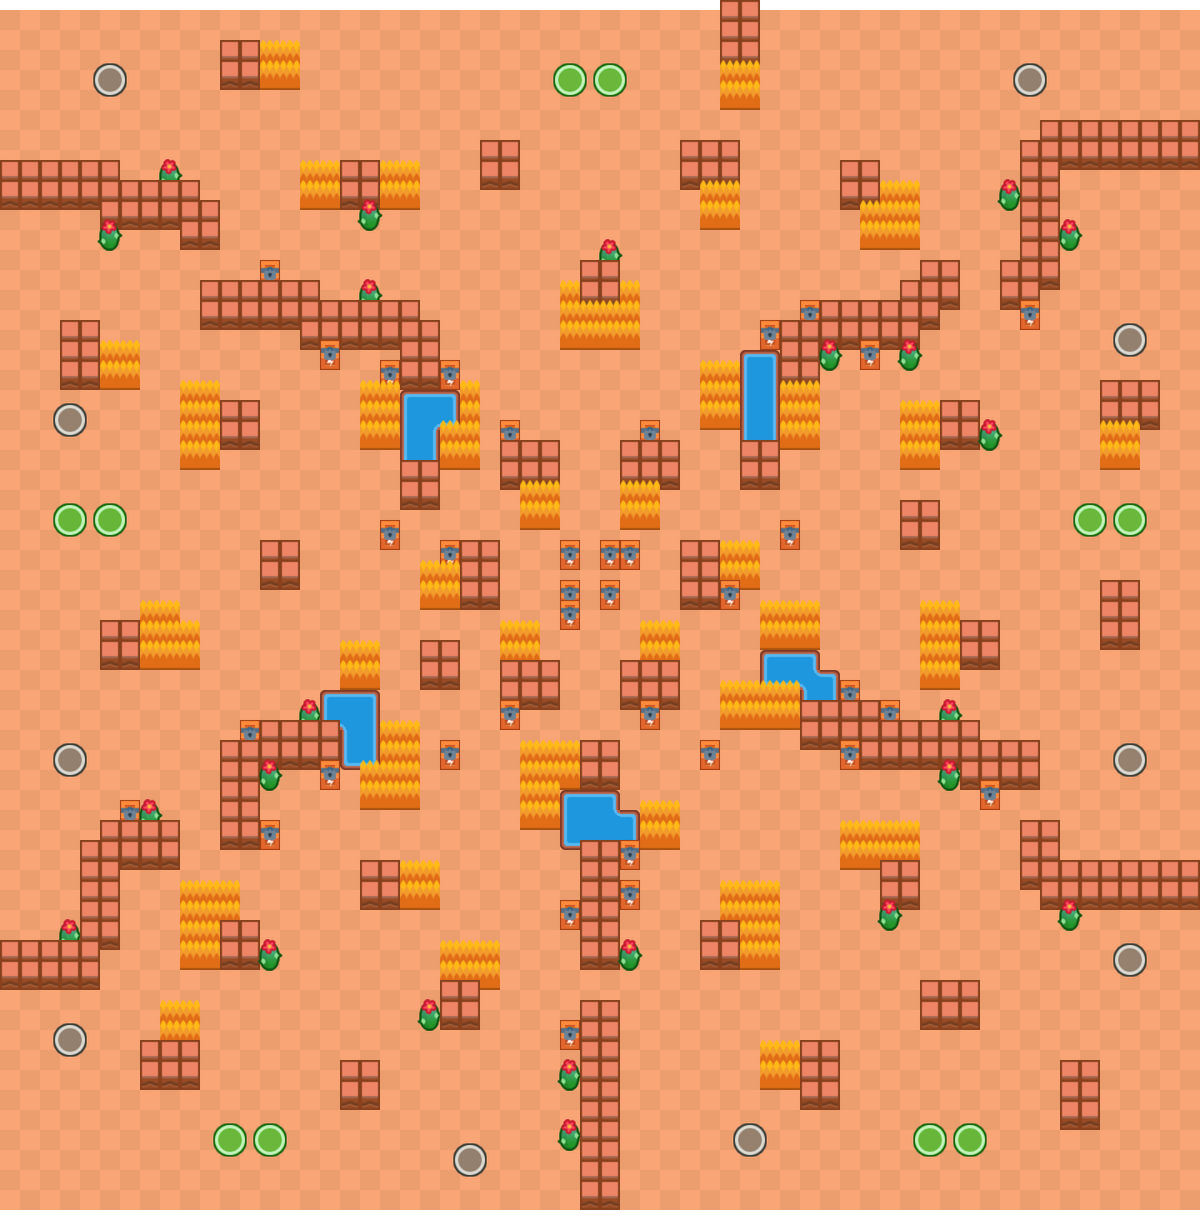 https://static.wikia.nocookie.net/brawlstars/images/7/72/Double_Trouble-Map.png/revision/latest/scale-to-width-down/1200?cb=20231215114142